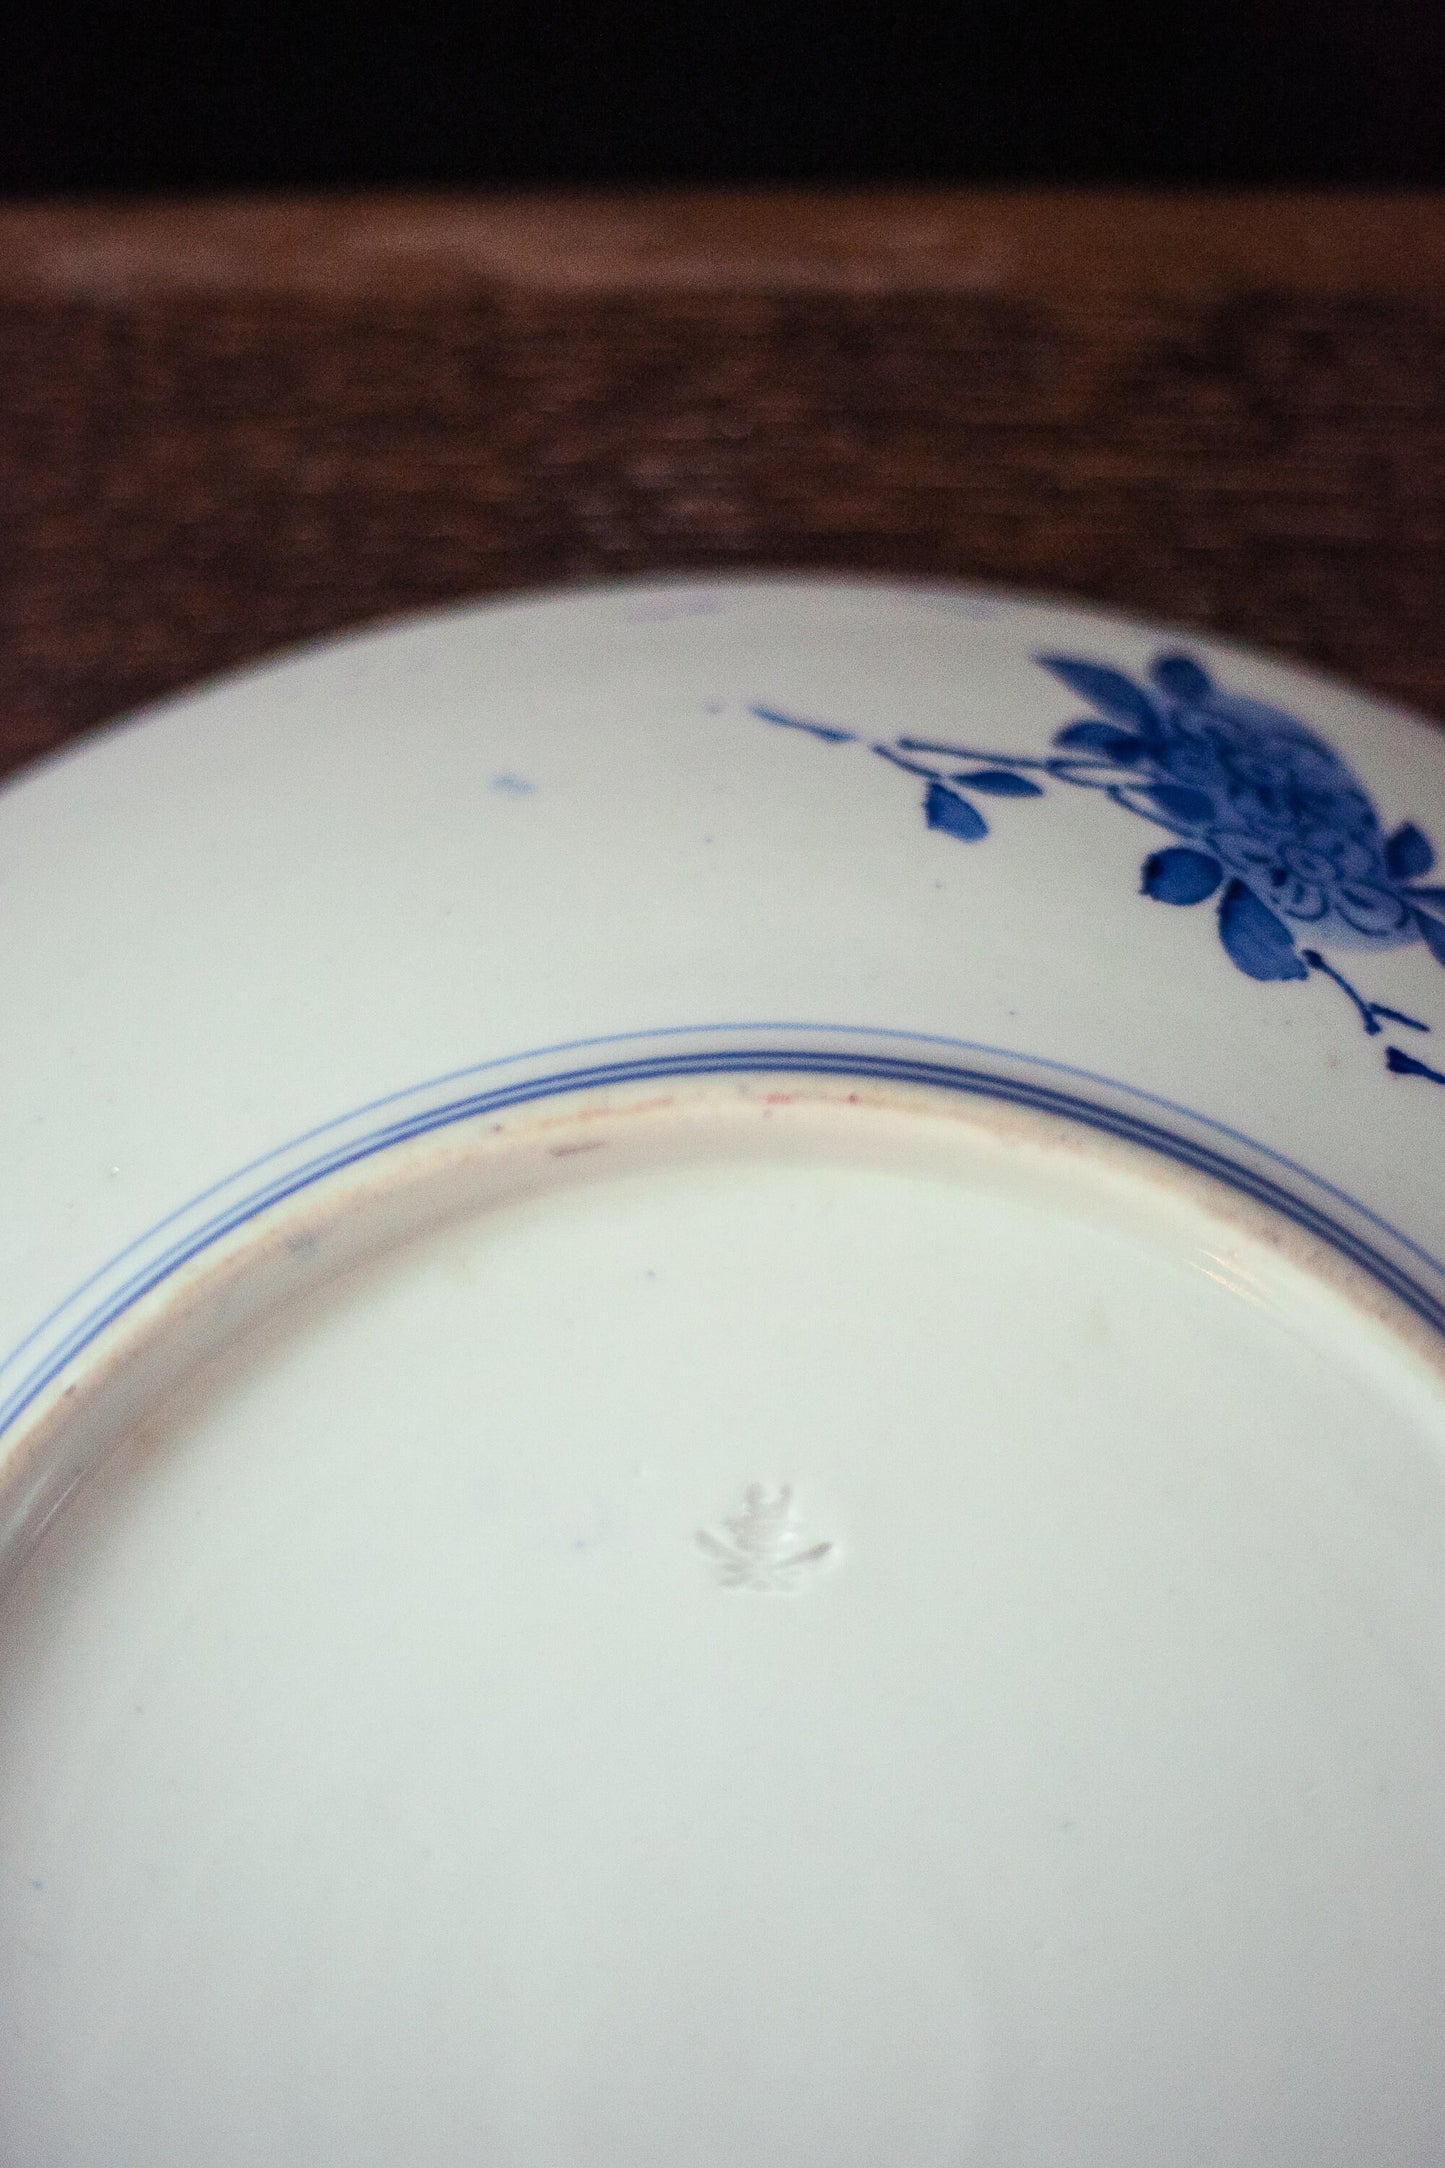 Japanese Hand Painted Blue & White 11" Serving Plate - Antique Blue White Porcelain Plate late 1800's SeiJi KaiSha Pure Water Company